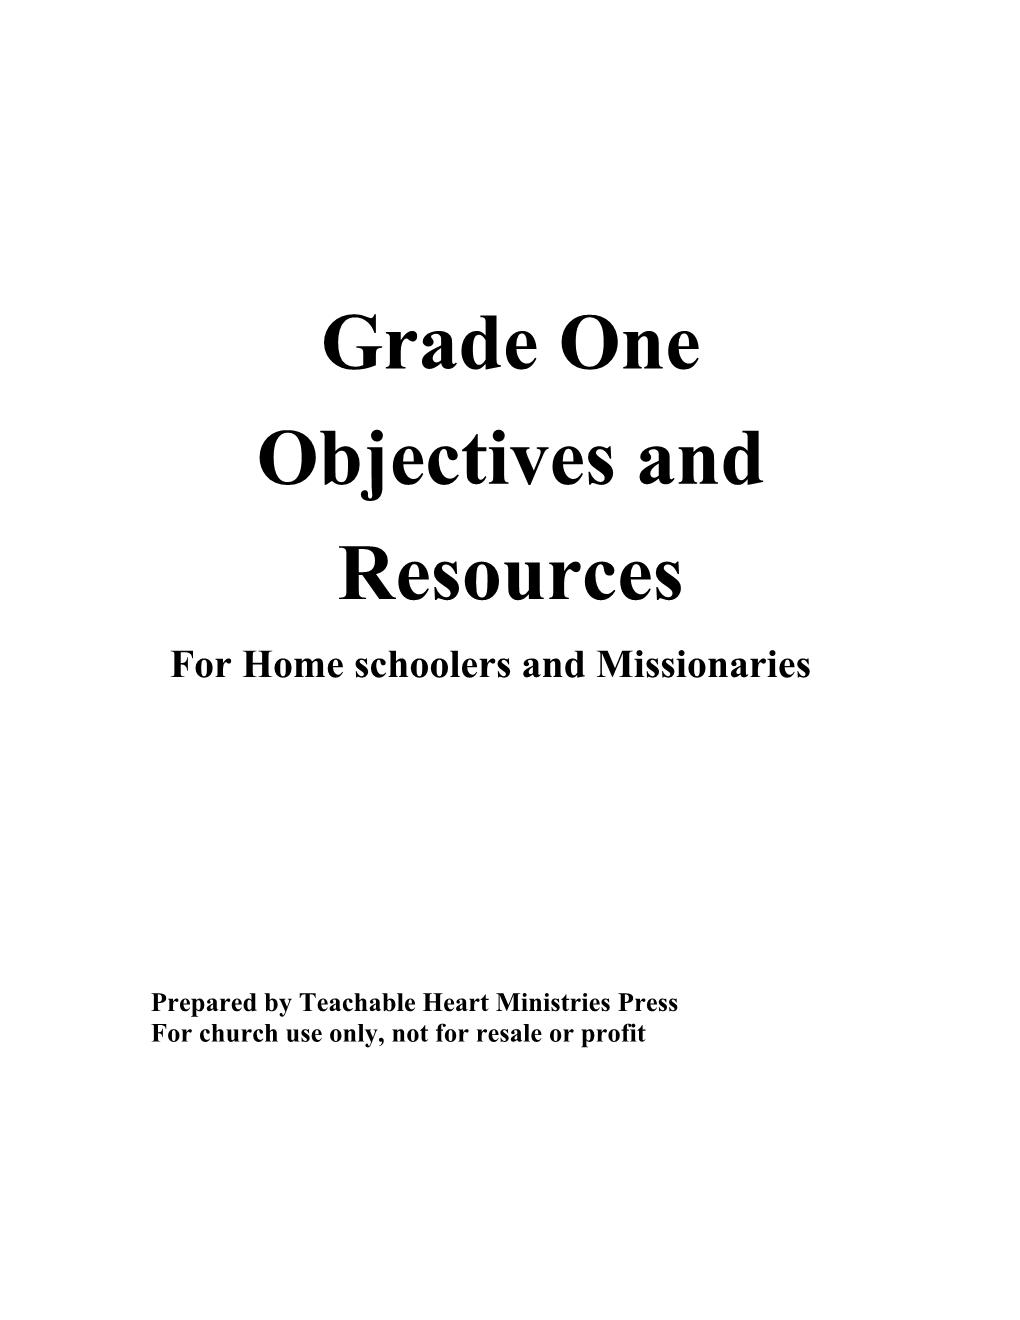 For Home Schoolers and Missionaries